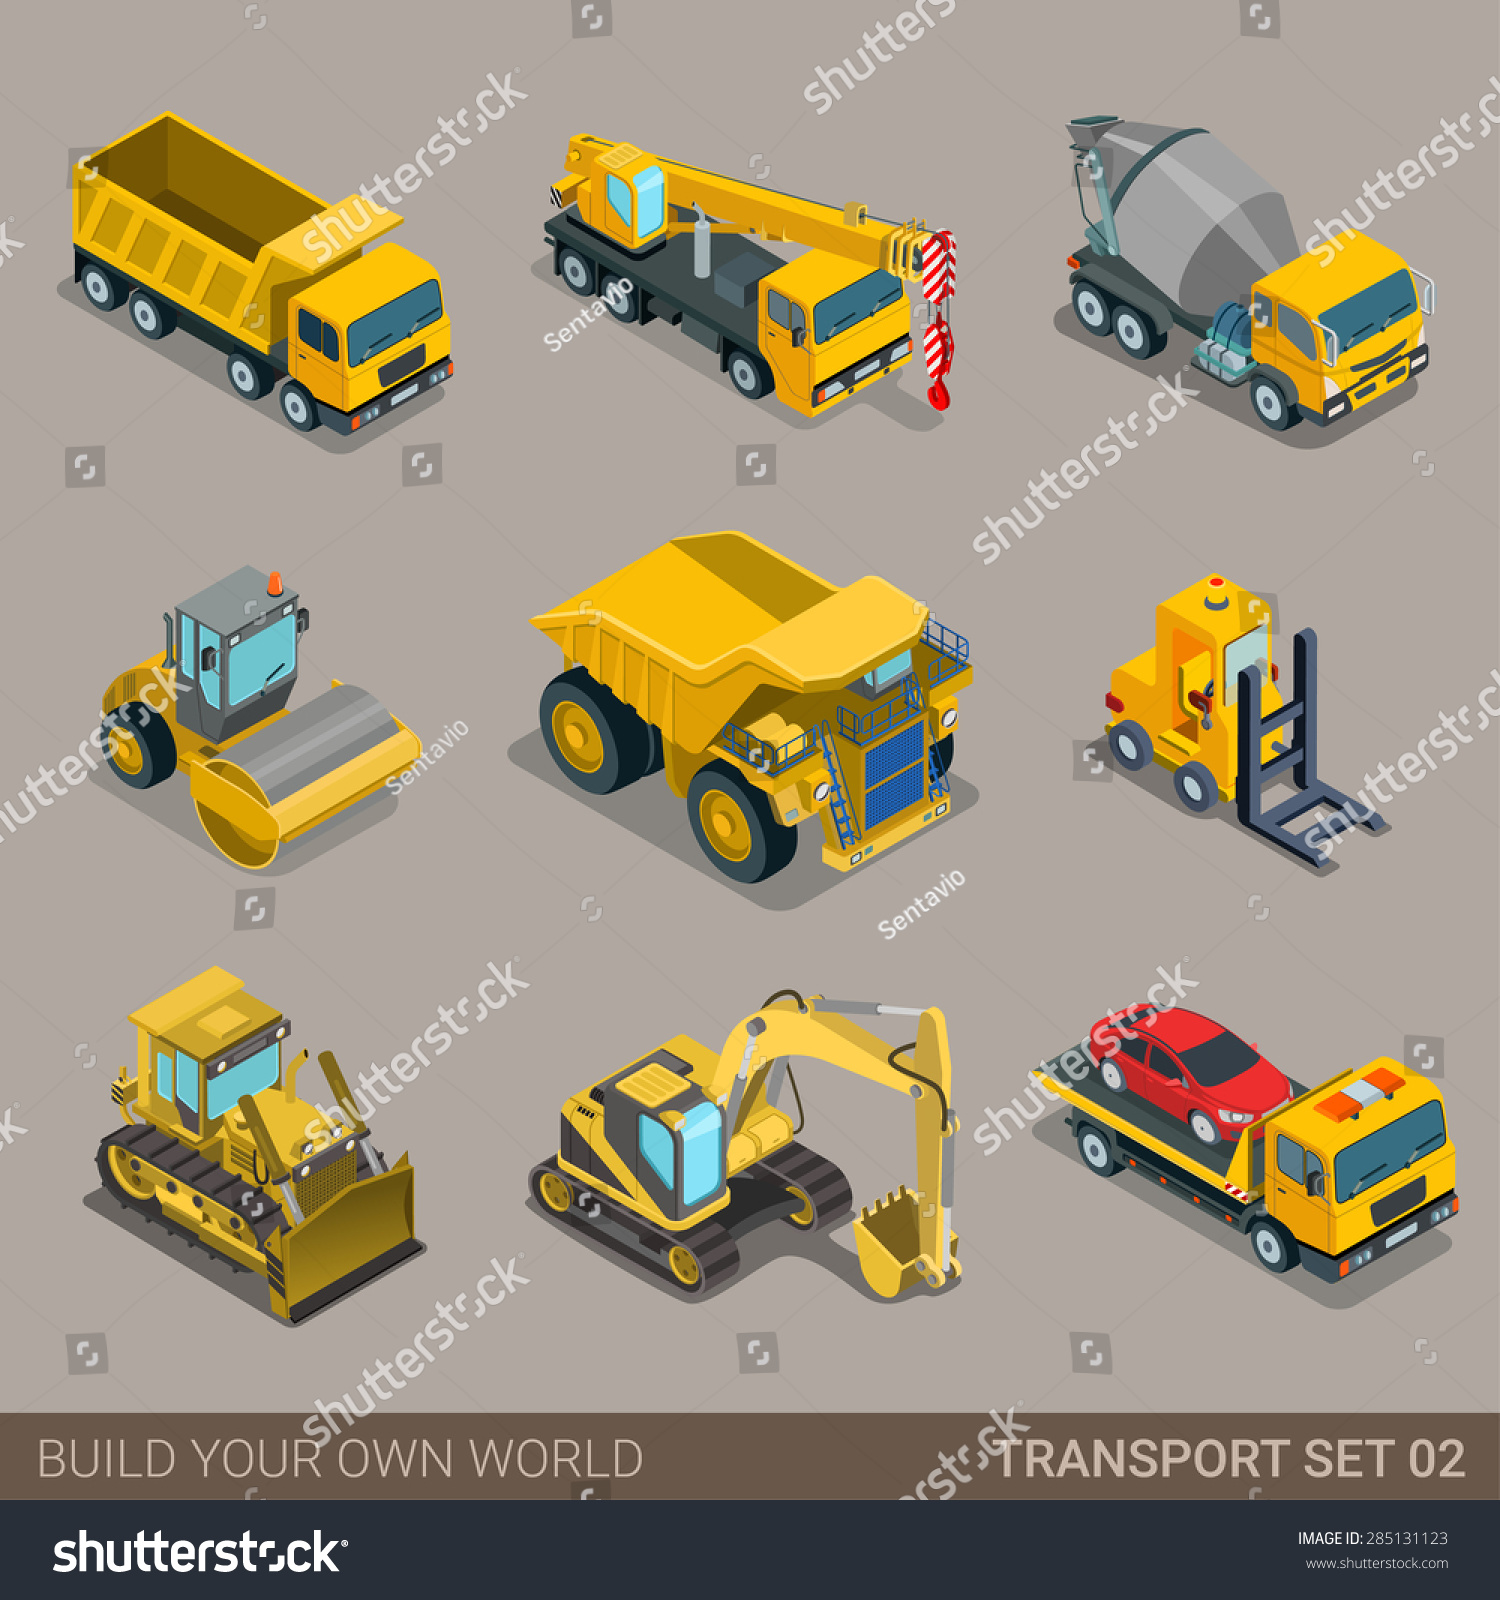 SVG of Flat 3d isometric city construction transport icon set. Excavator crane grader concrete cement mixer roller pit dump truck loader tow wrecker truck. Build your own world web infographic collection. svg